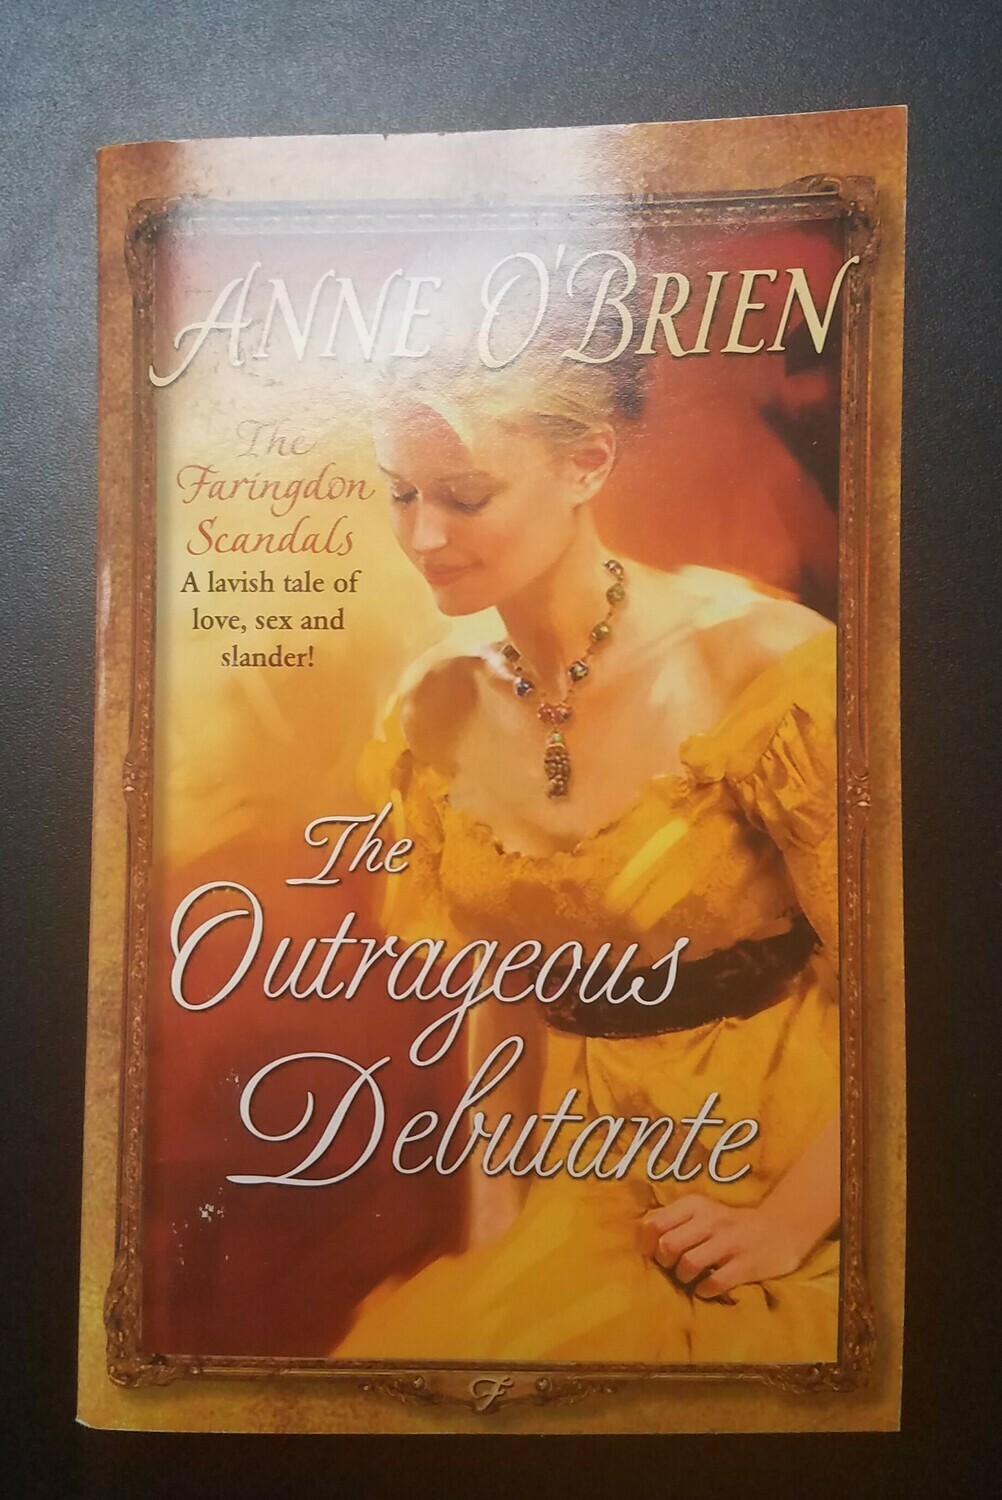 The Outrageous Debutante by Anne O'Brien